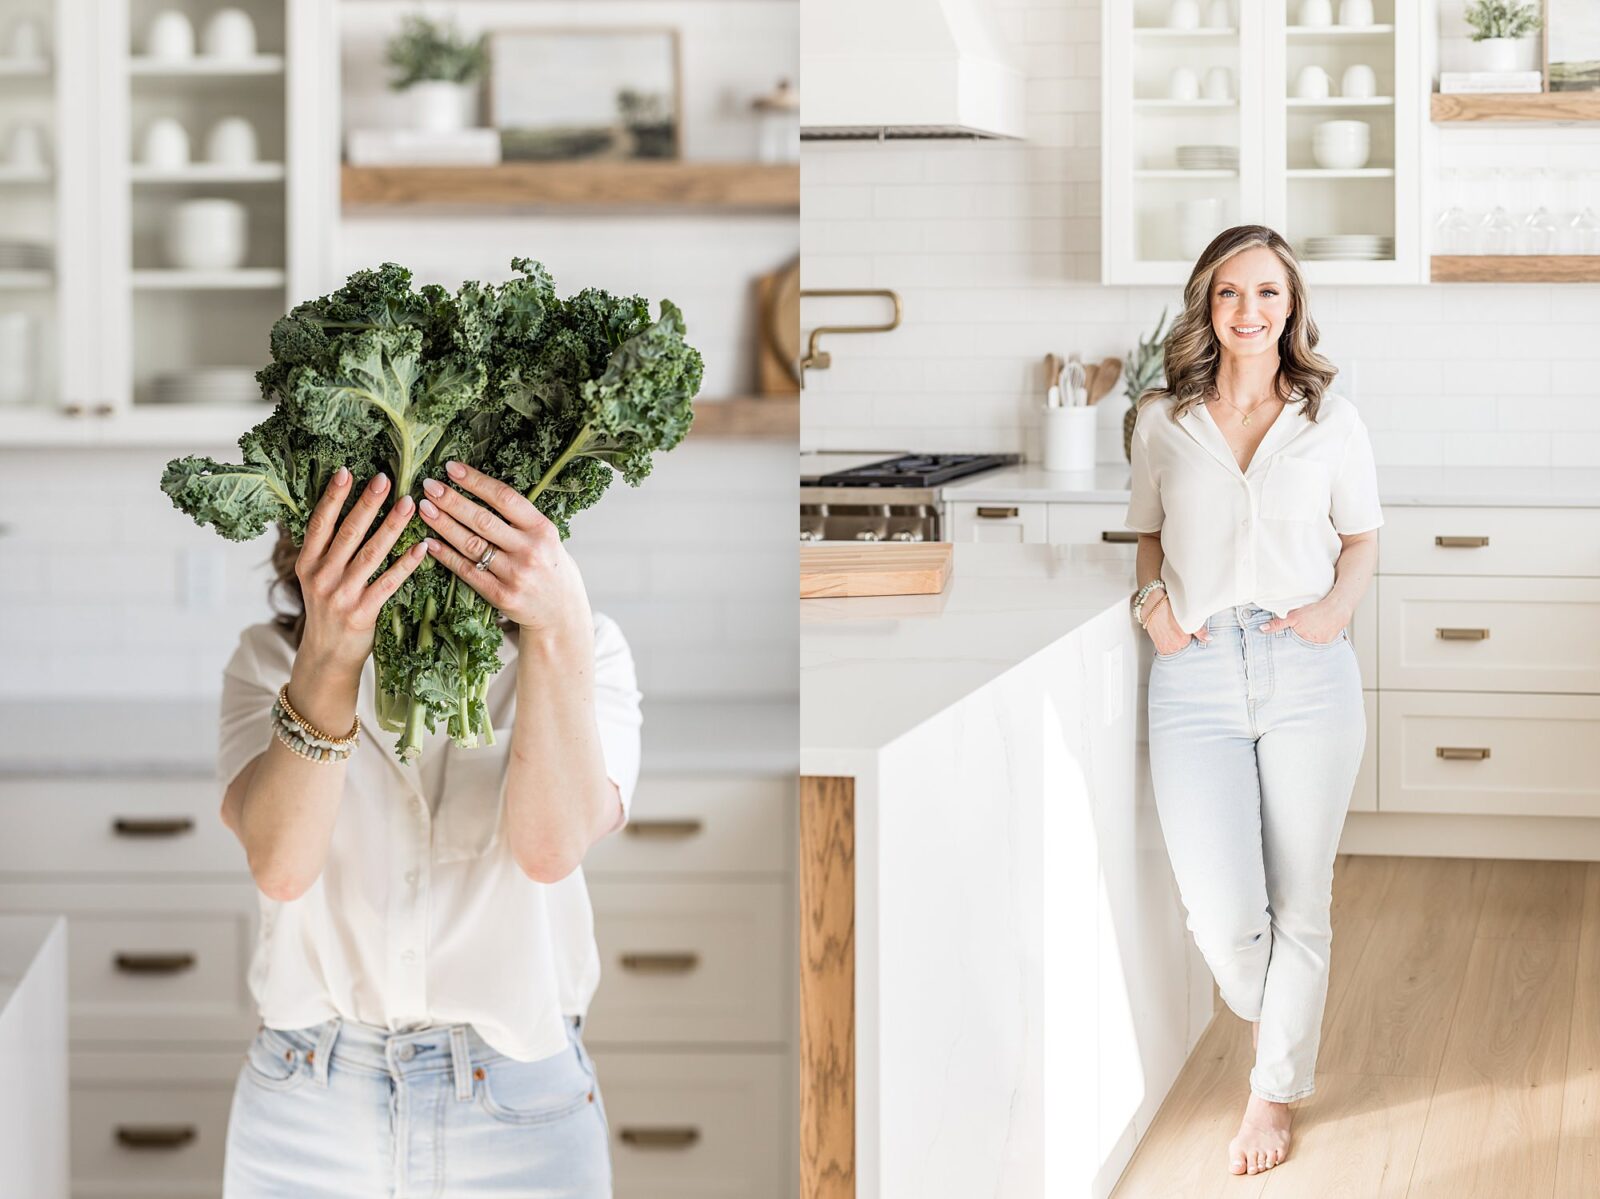 Holistic Nutritionist Brand Photography